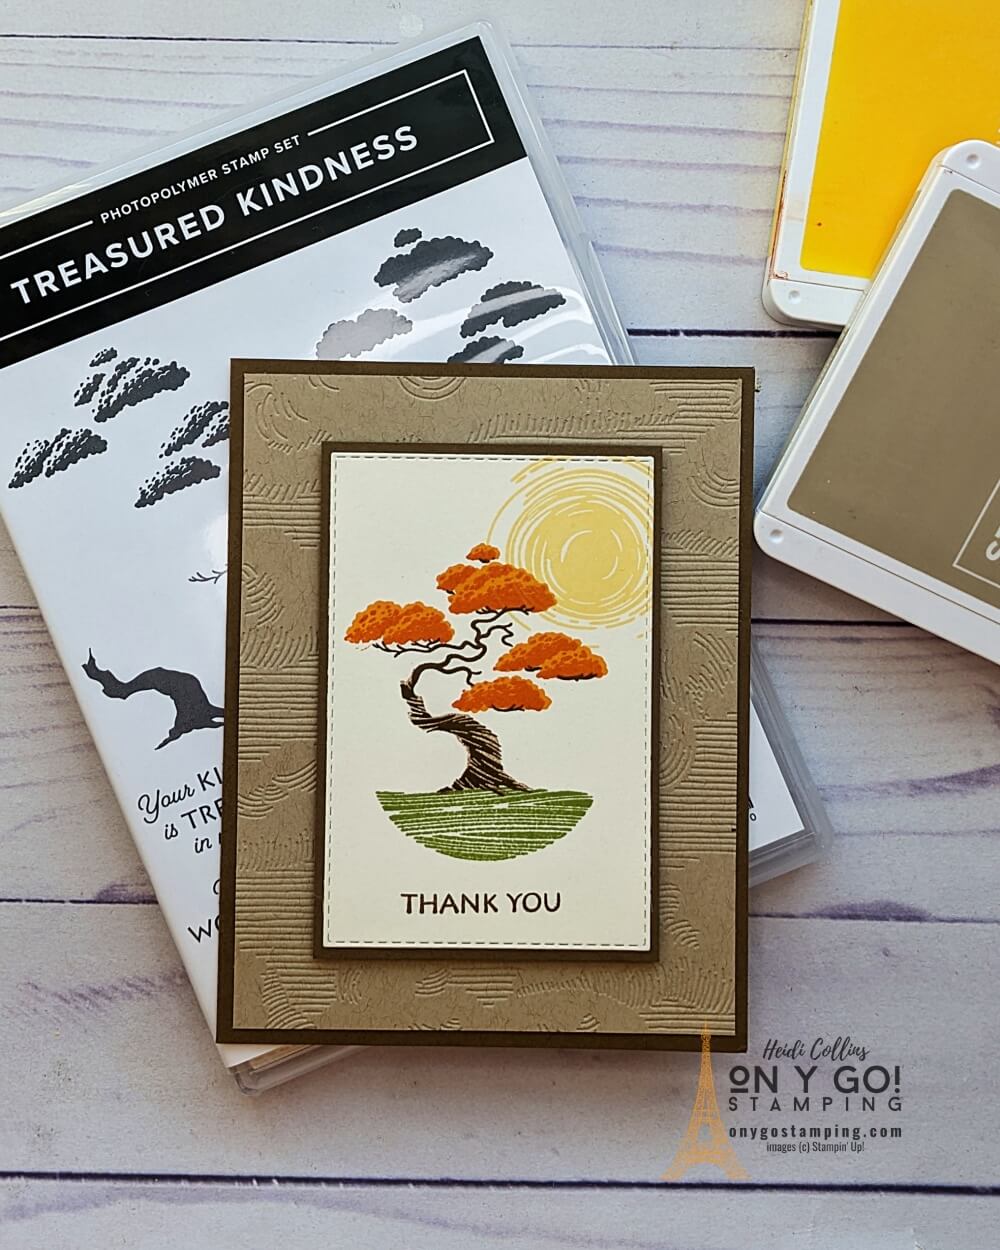 Handmade thank you cards with the Treasured Kindness stamp set from Stampin' Up! I'm excited to send my customers these thank you cards in the month of October!